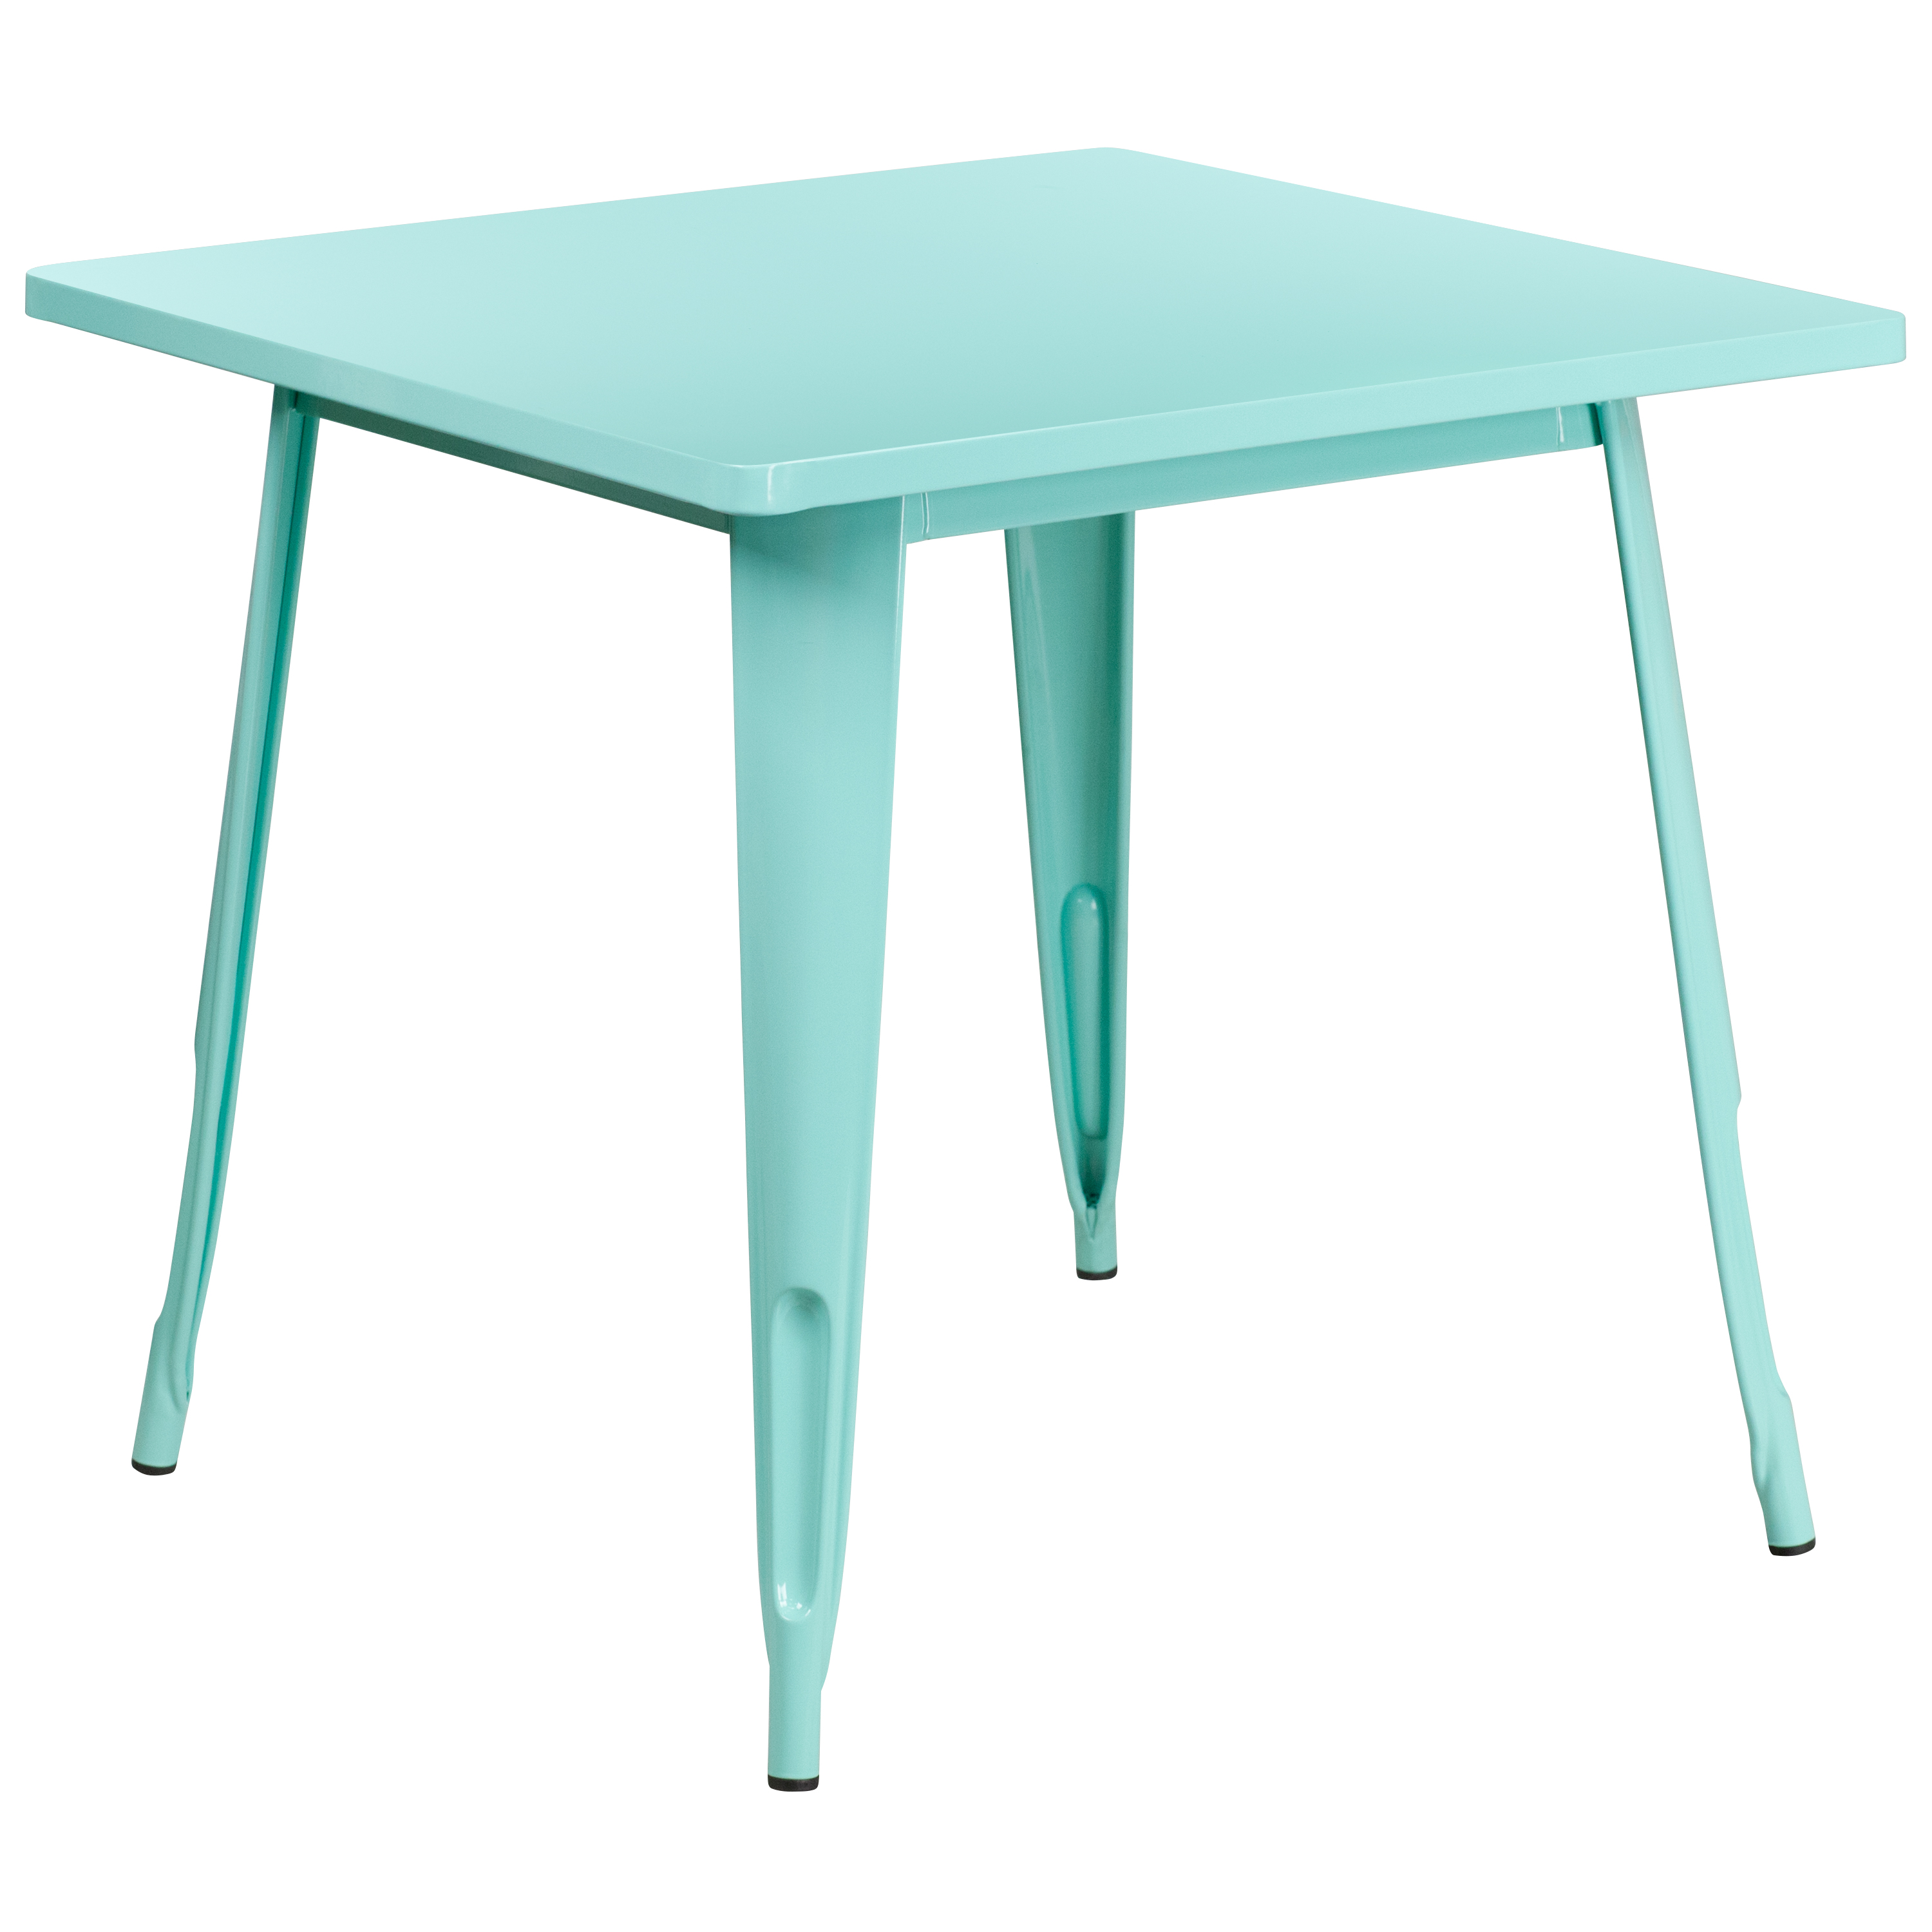 Flash Furniture Commercial Grade 31.5" Square Mint Green Metal Indoor-Outdoor Table - image 1 of 3